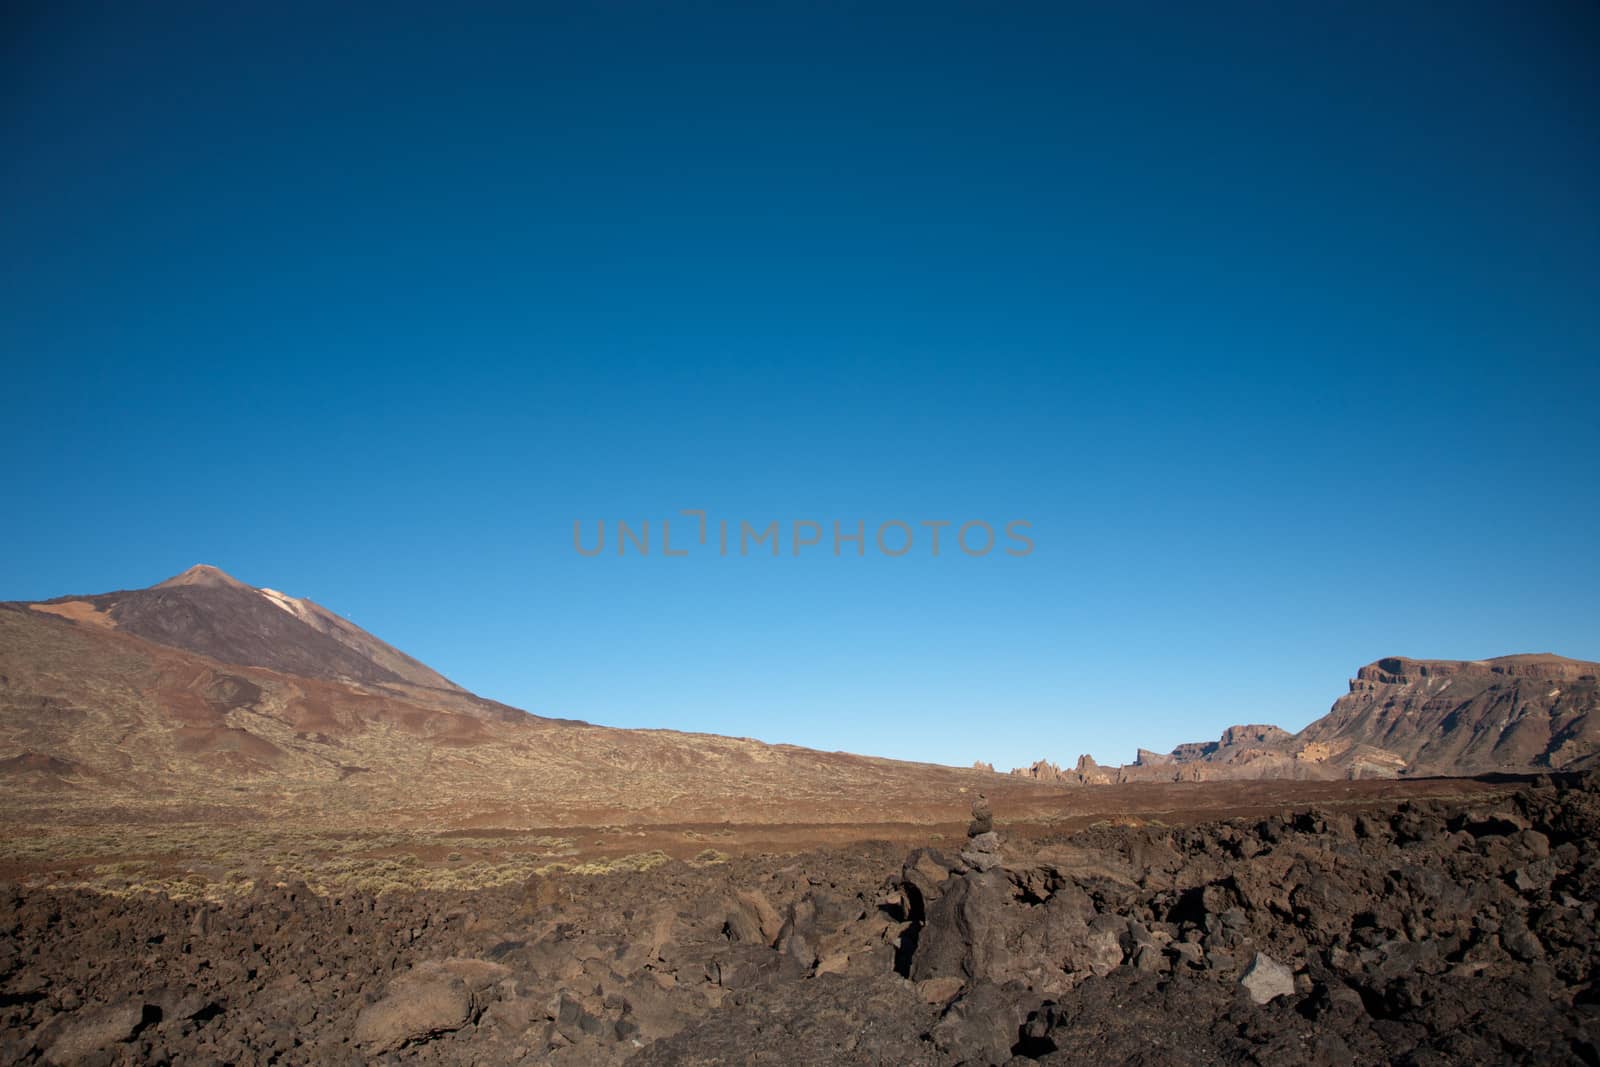 Teide in the beautiful landscape of the national park - Tenerife with the famous rock, Cinchado in the scene.